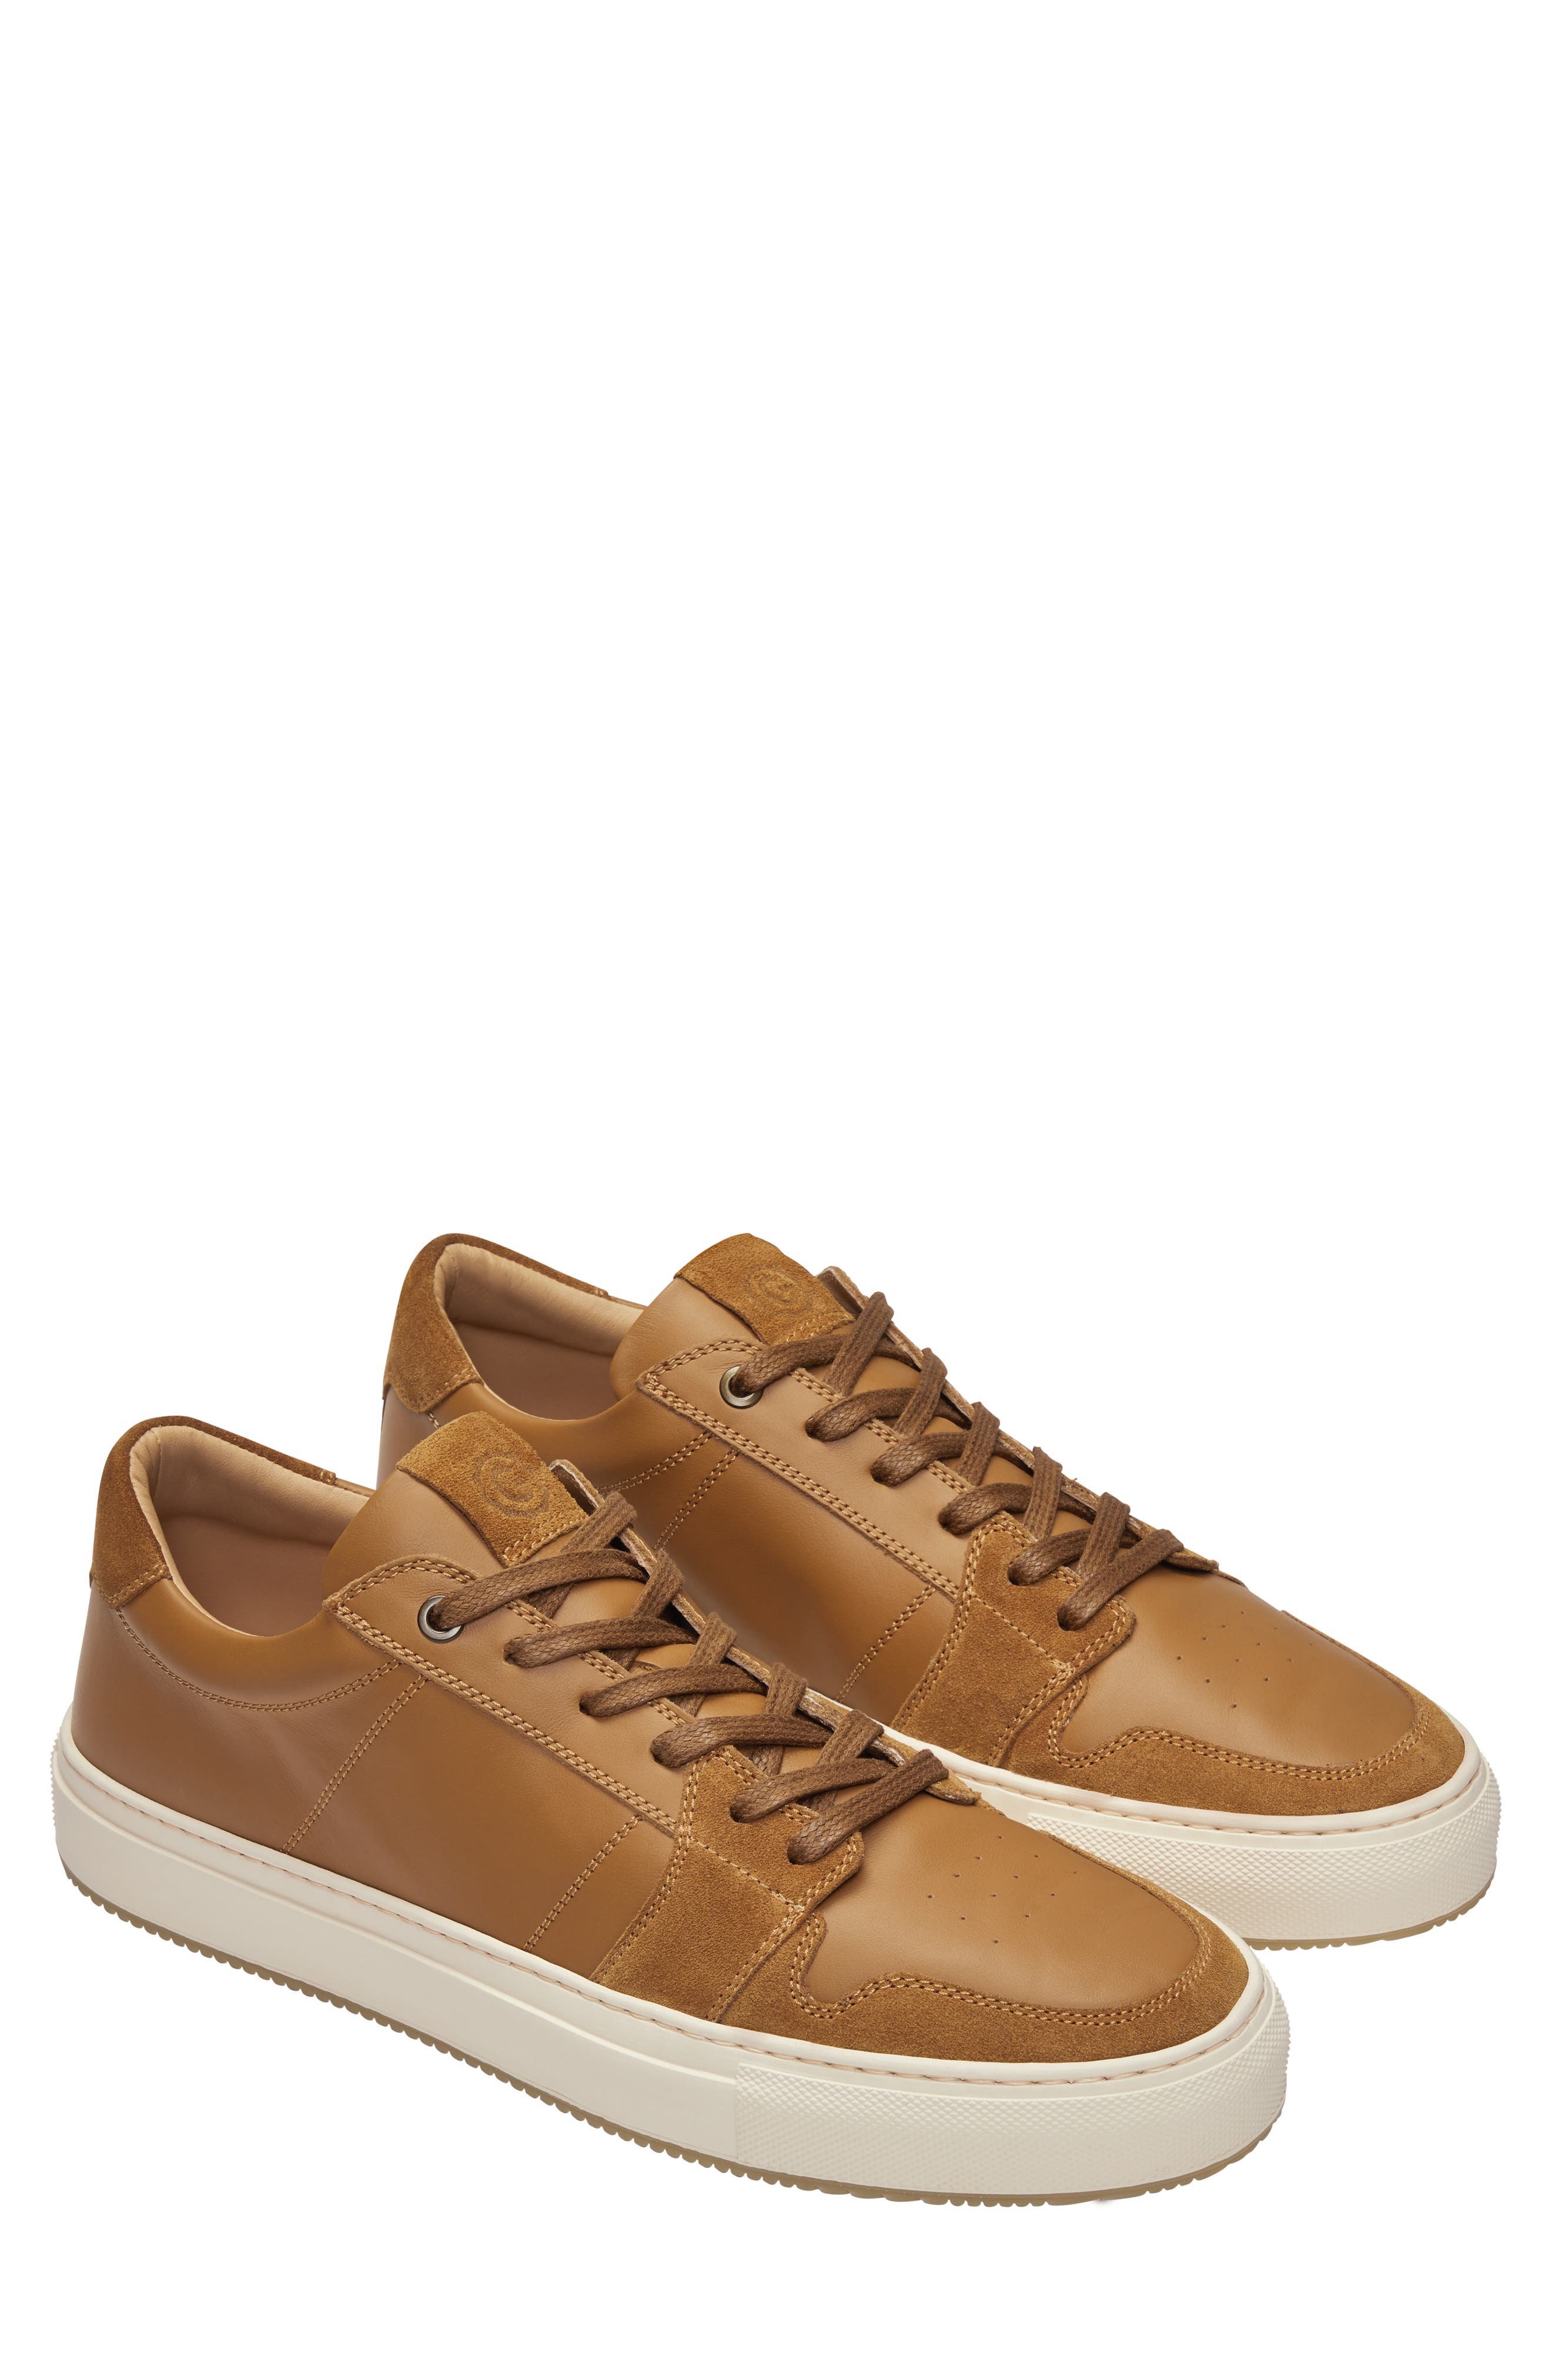 GREATS - Men's Casual Fashion Shoes and Sneakers